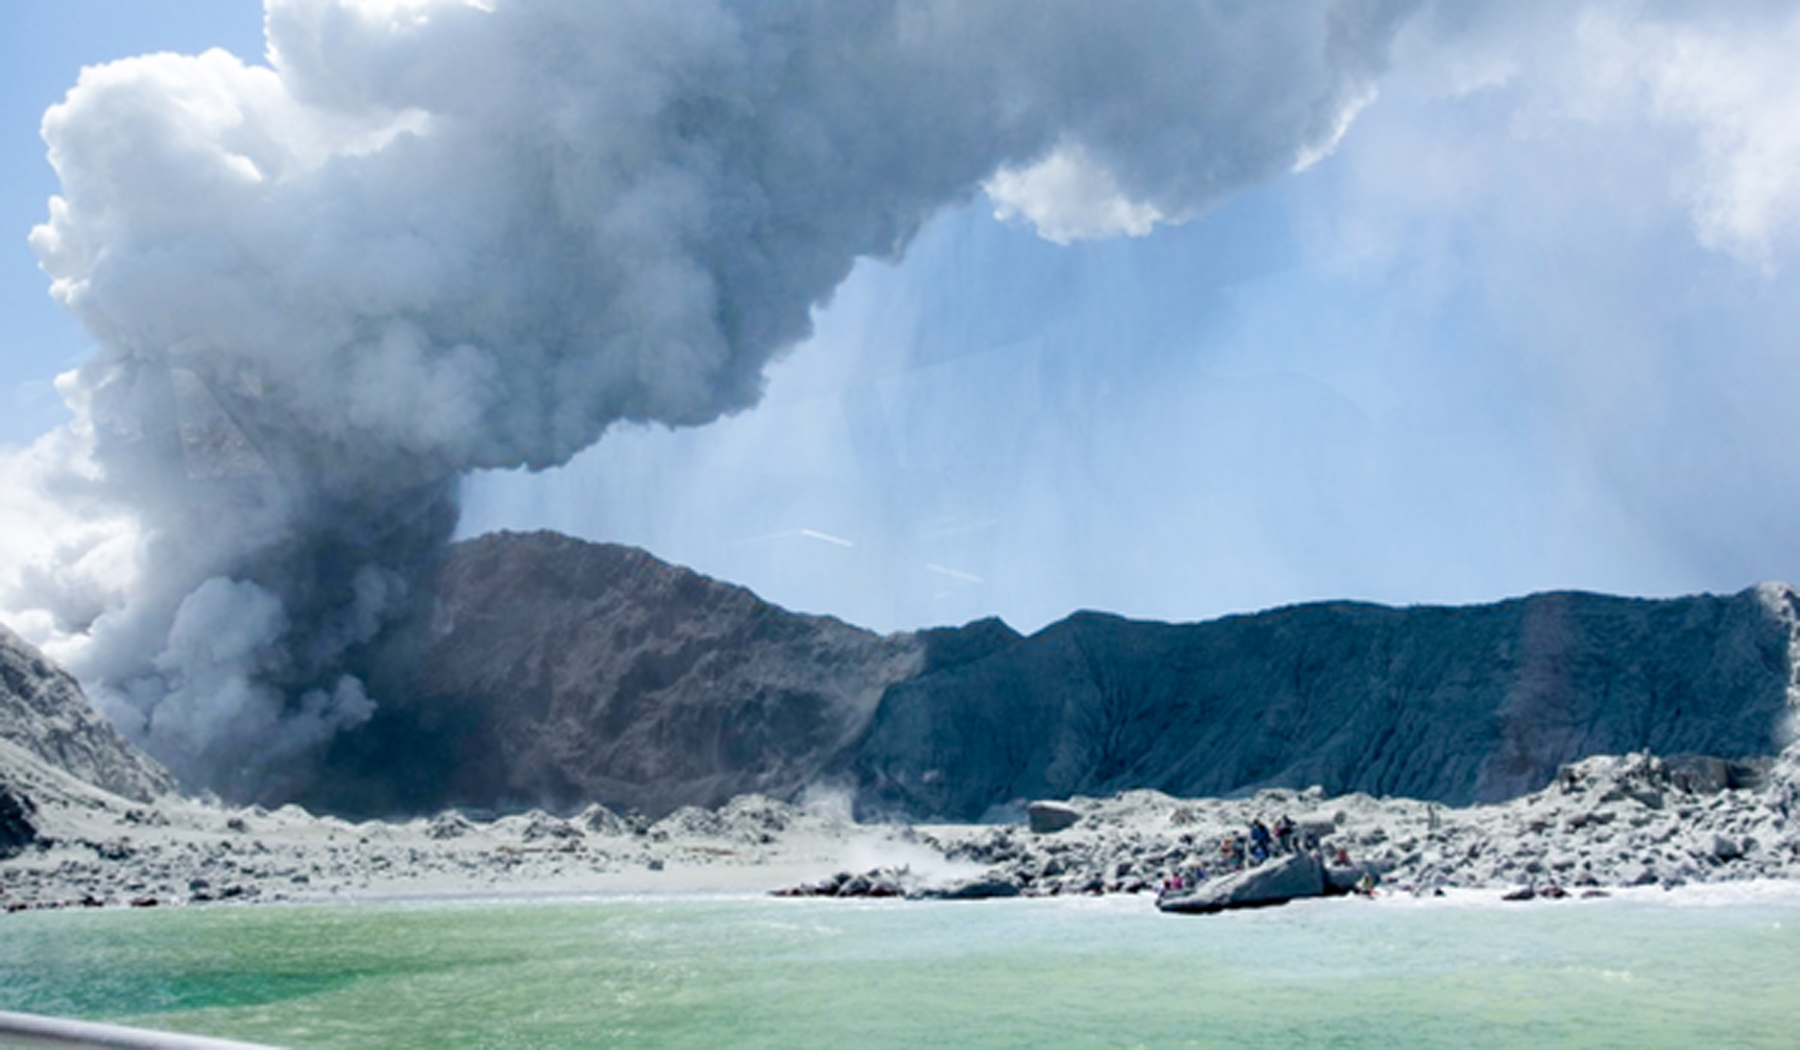 (191209) -- WHITE ISLAND (NEW ZEALAND), Dec. 10, 2019 (Xinhua) -- Photo taken on Dec. 9, 2019 shows the heavy smoke from volcanic eruption at New Zealand's White Island. Five people were confirmed dead in a volcanic eruption in New Zealand's White Island in the Eastern Bay of Plenty of the North Island on Monday, with more casualties likely, the police said. (Photo provided by Michael Schade/Handout via Xinhua)